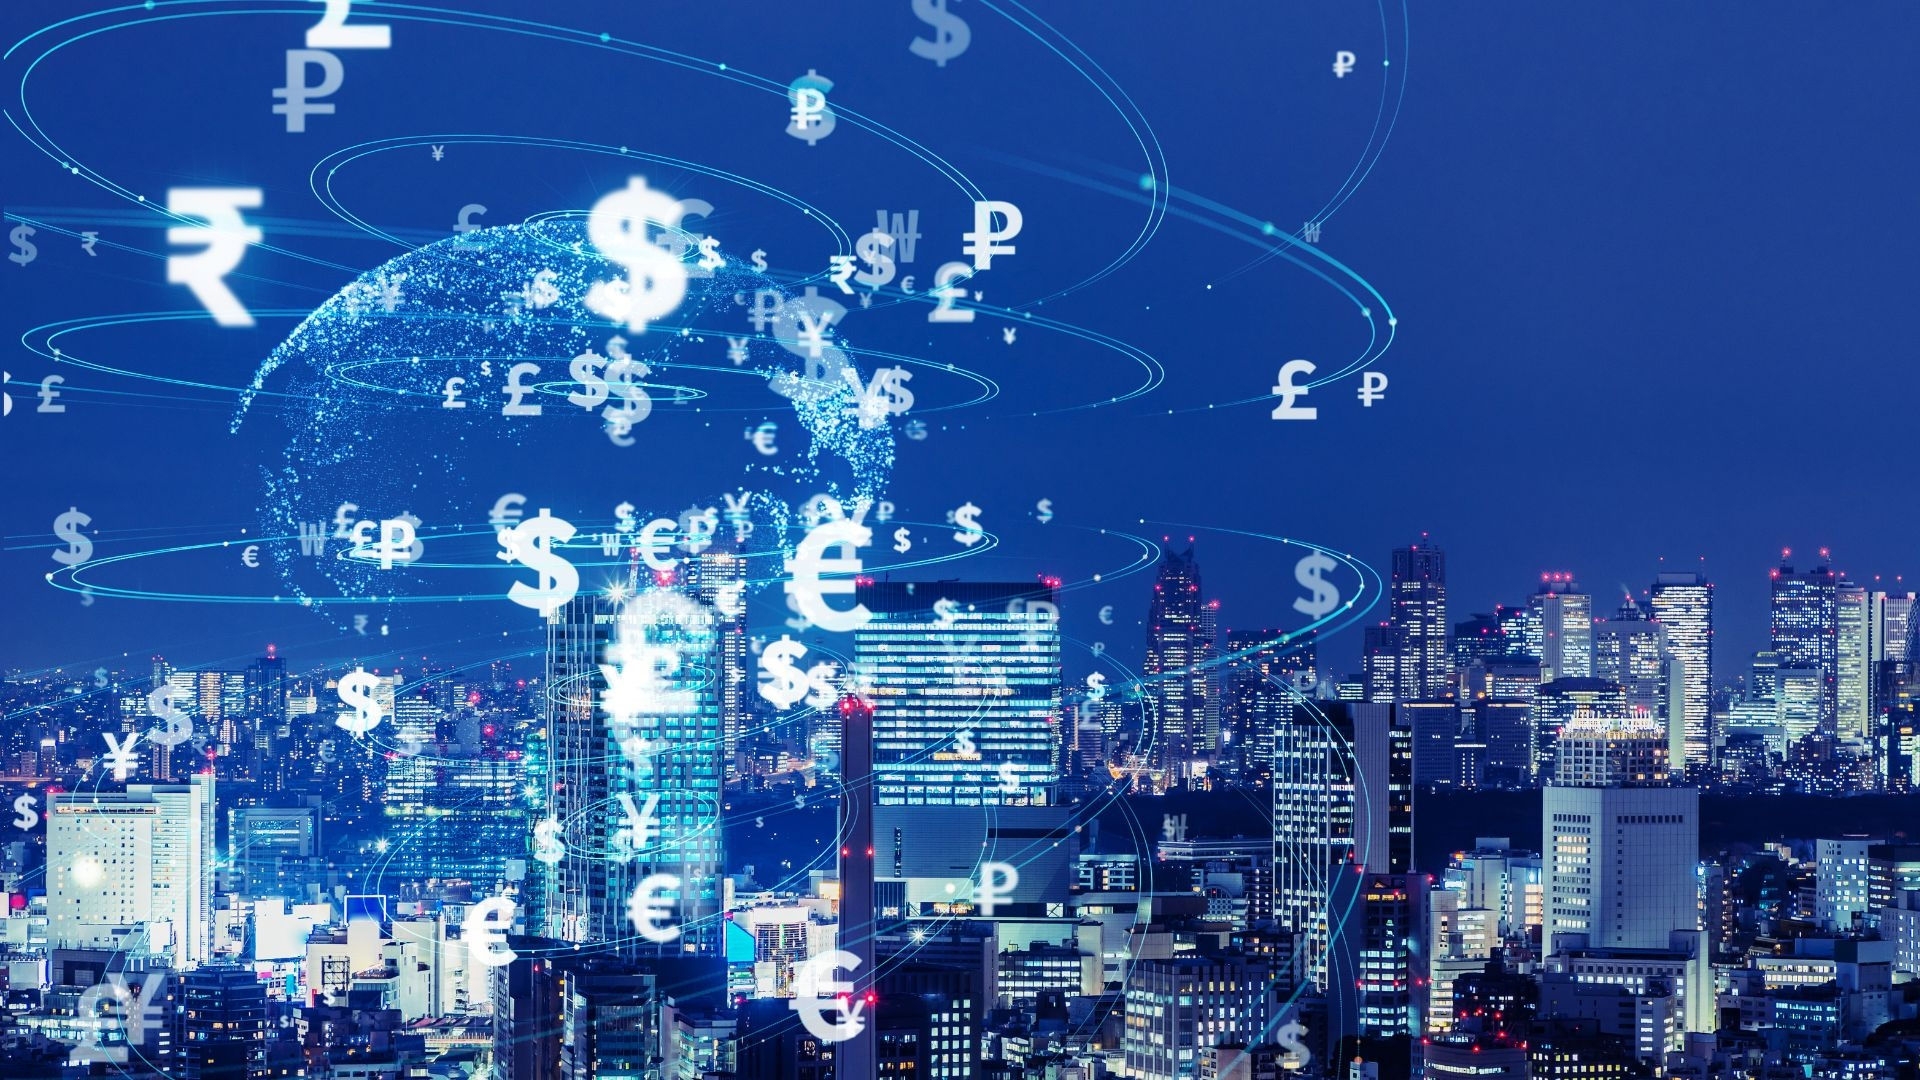 Futuristic foreign investment concept with blue world currency icons floating over a dark blue city buildings background